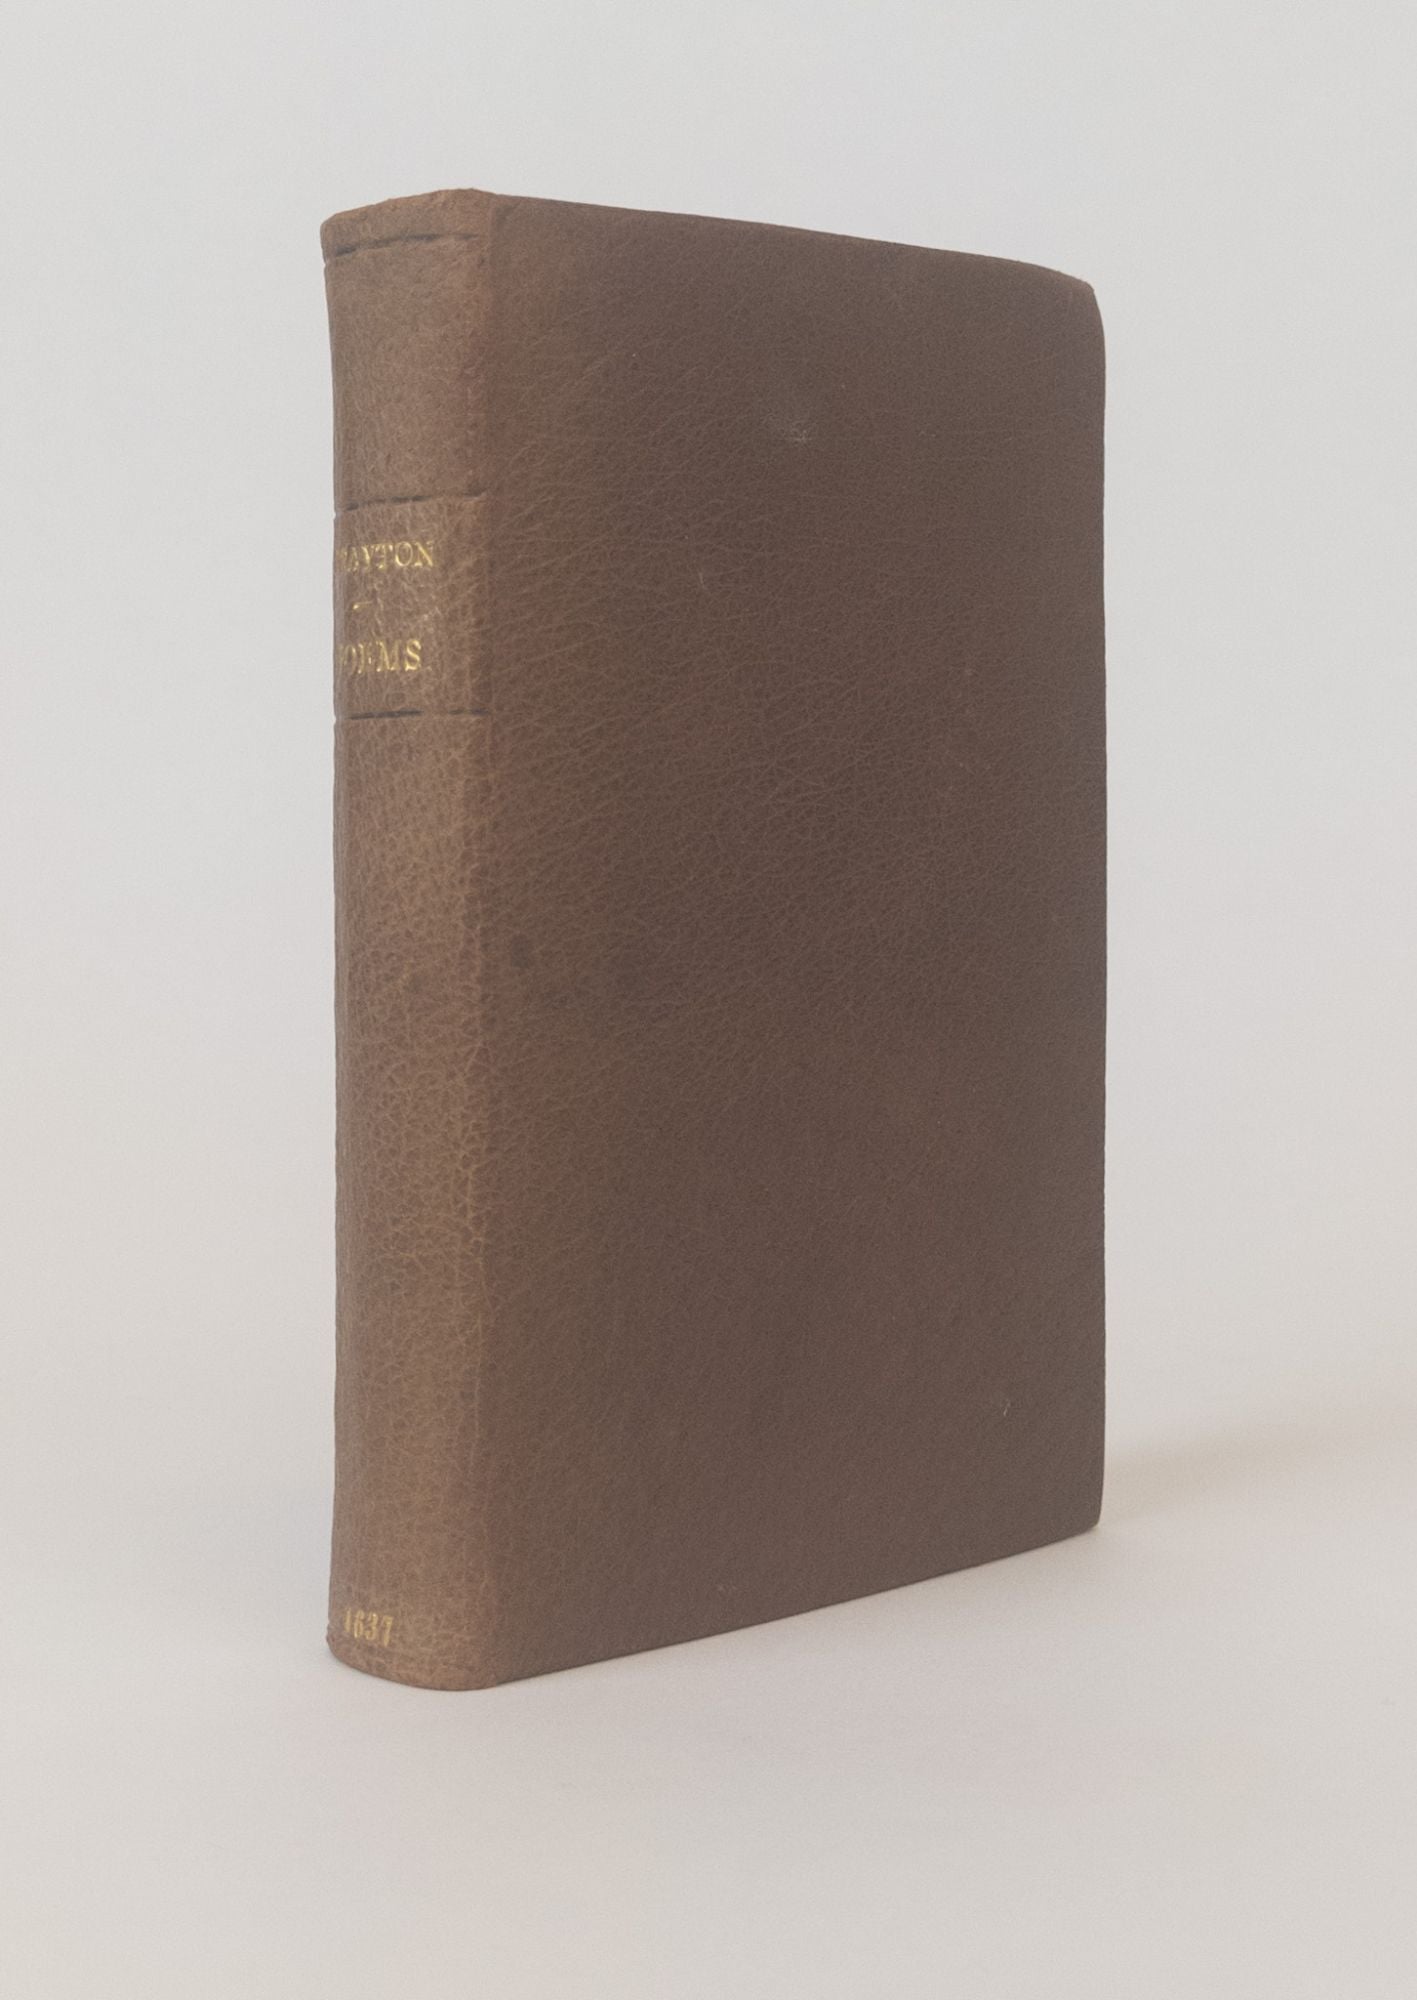 Product Image for POEMS: ENGLANDS HEROICALL EPISTLES; [Bound with] THE LEGENDS OF ROBERT, DUKE OF NORMANDIE. MATILDA, THE FAIRE. PIERCE GAVESTON, EARL OF CORNWALL. THOMAS CROMWEL, EARLE OF ESSEX